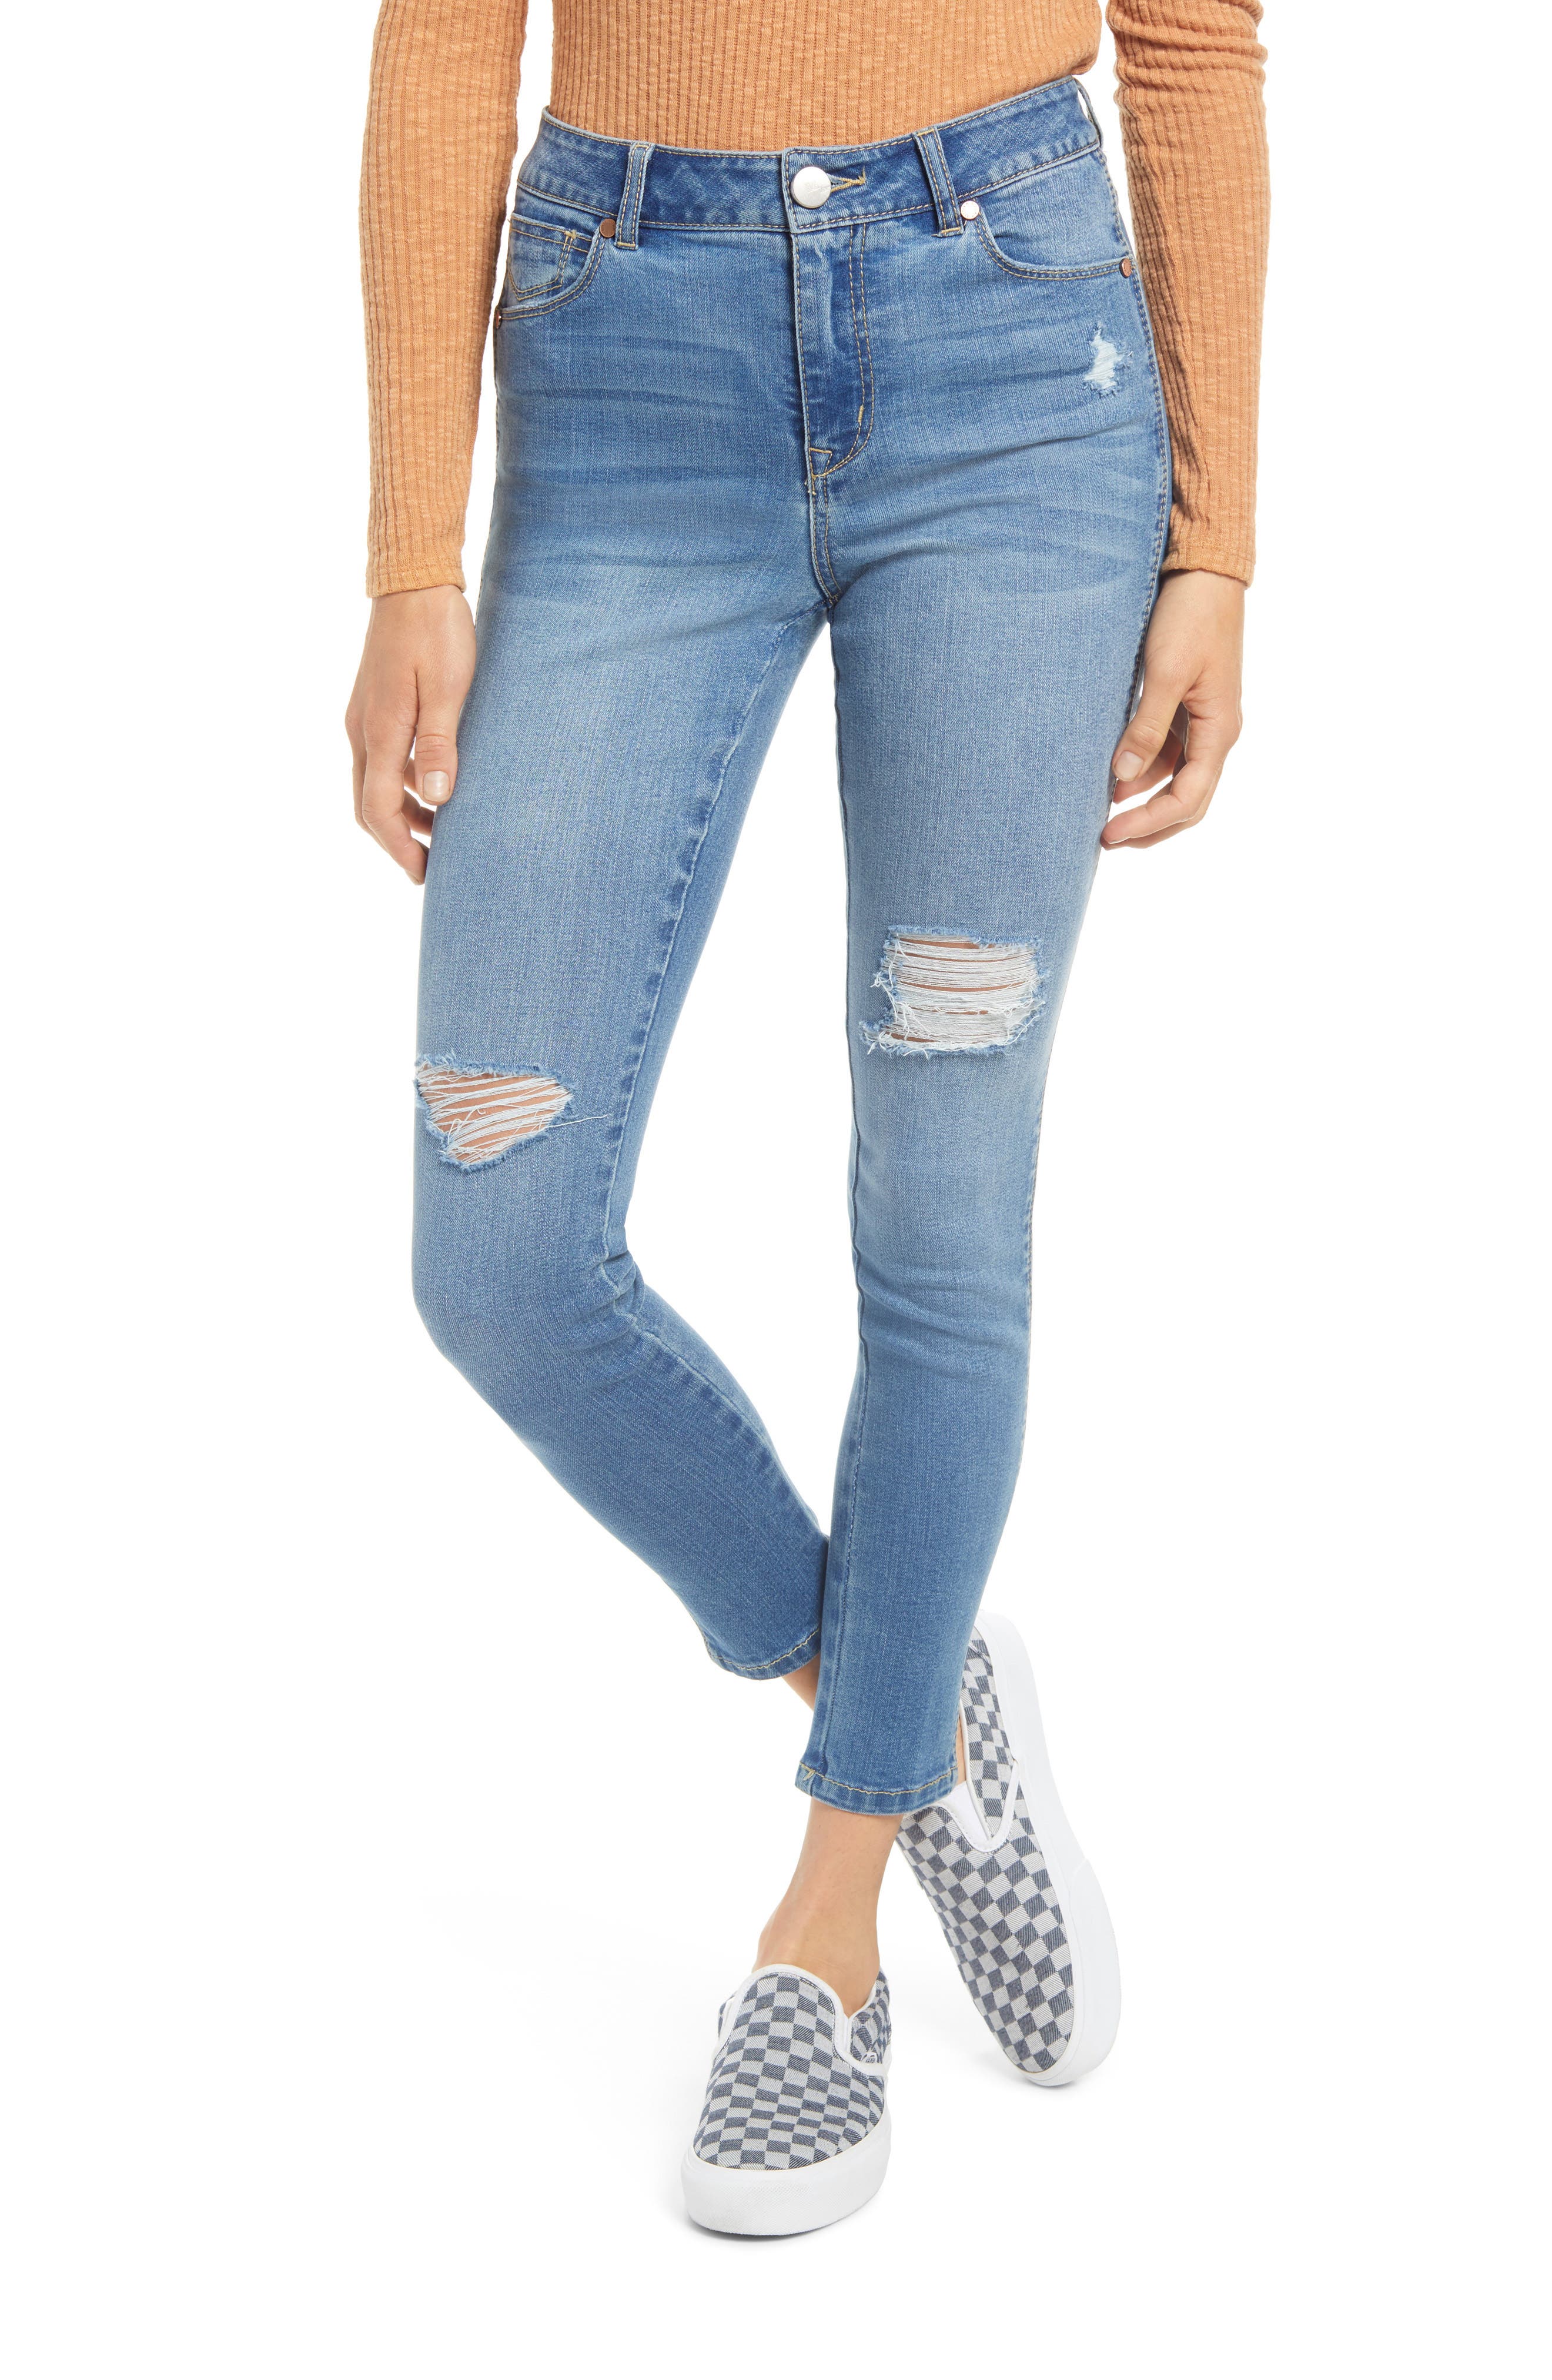 nordstrom ripped jeans